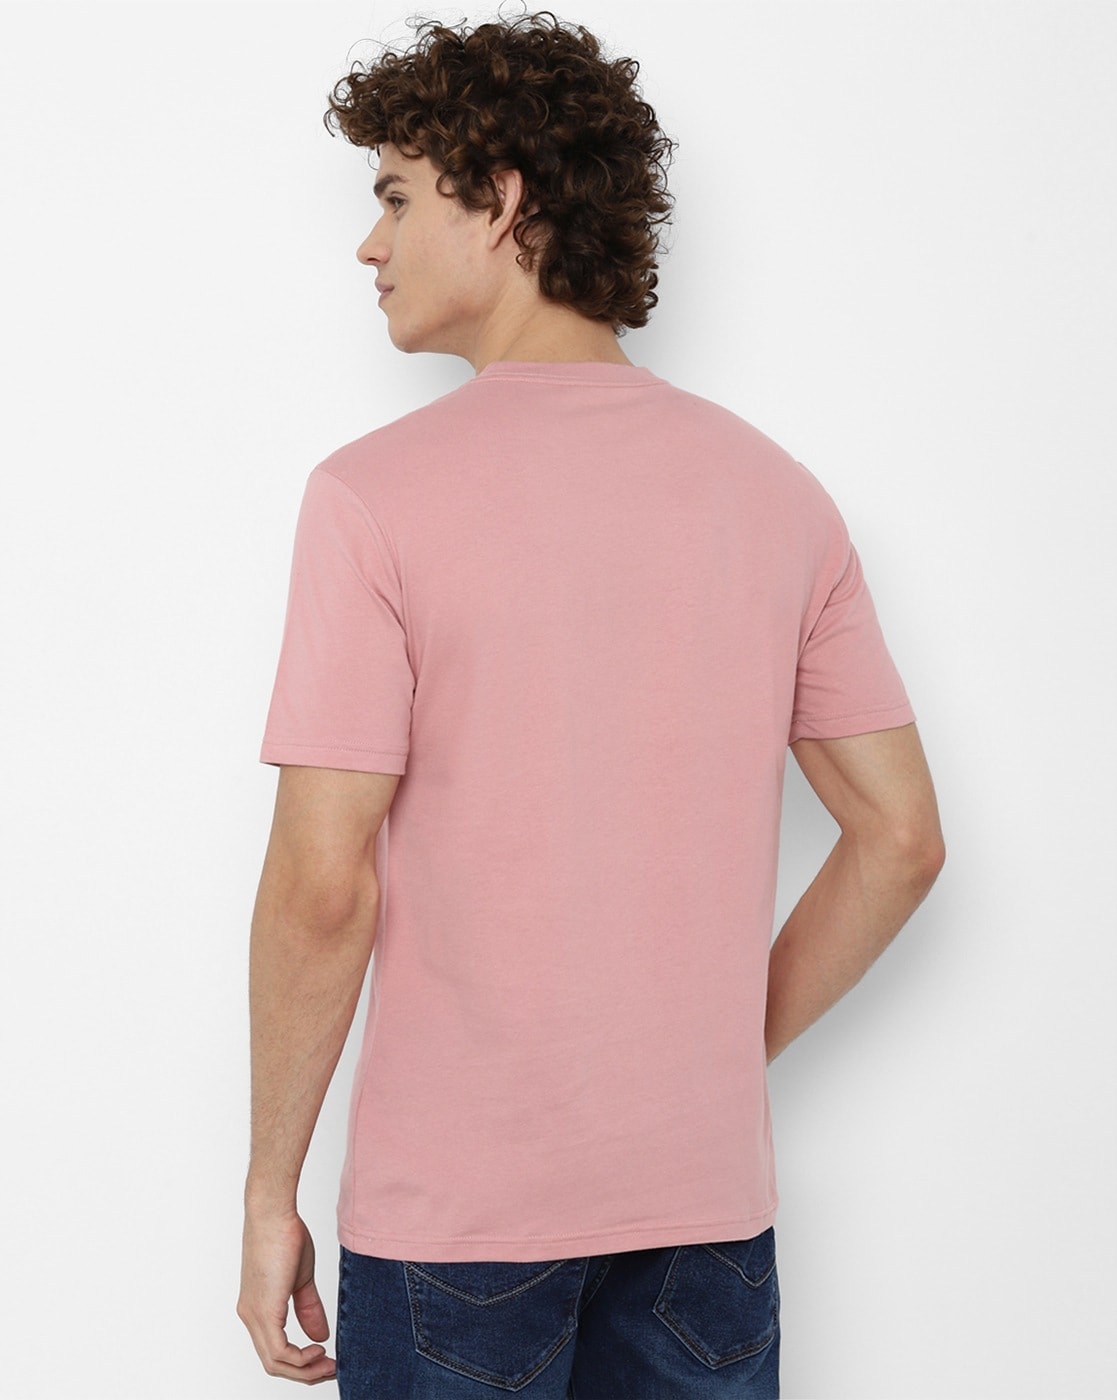 Buy Baby Pink Half Sleeve Plain T-Shirt for Men online in India - InkWynk